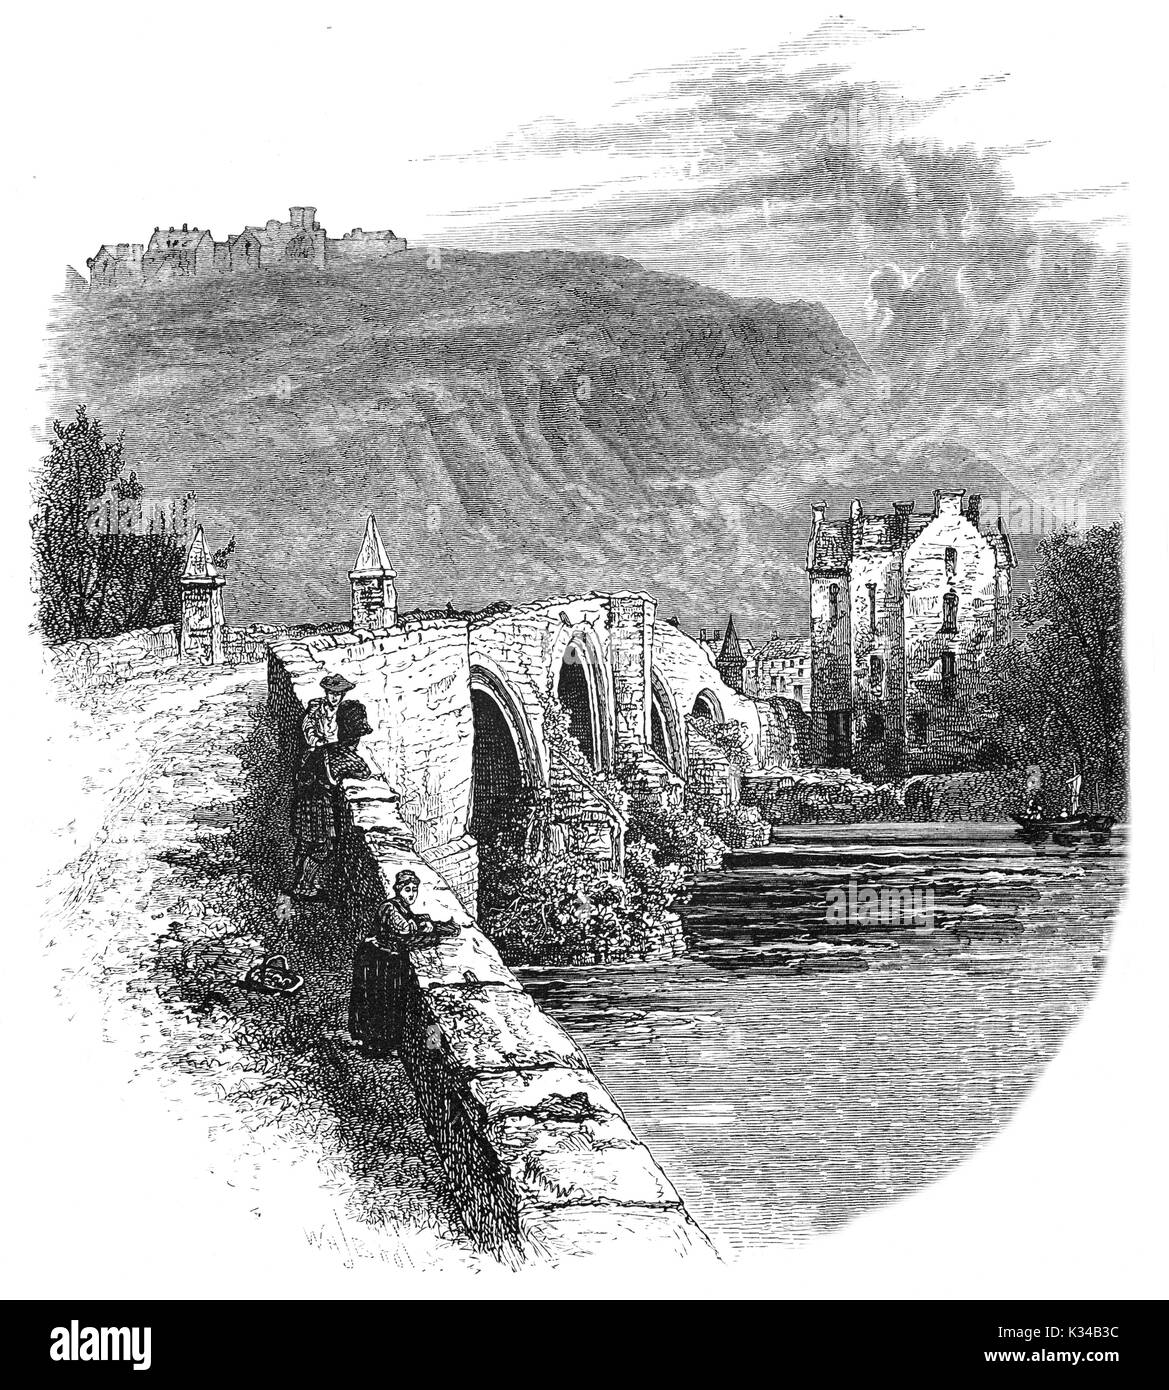 1870: Stirling Bridges built in the 15th or 16th Century, replaced a succession of timber bridges is the site of a battle during the First War of Scottish Independence. On 11 September 1297, the forces of Andrew Moray and William Wallace defeated the combined English forces of John de Warenne, 6th Earl of Surrey, and Hugh de Cressingham near Stirling, on the River Forth, Stirling, Scotland Stock Photo